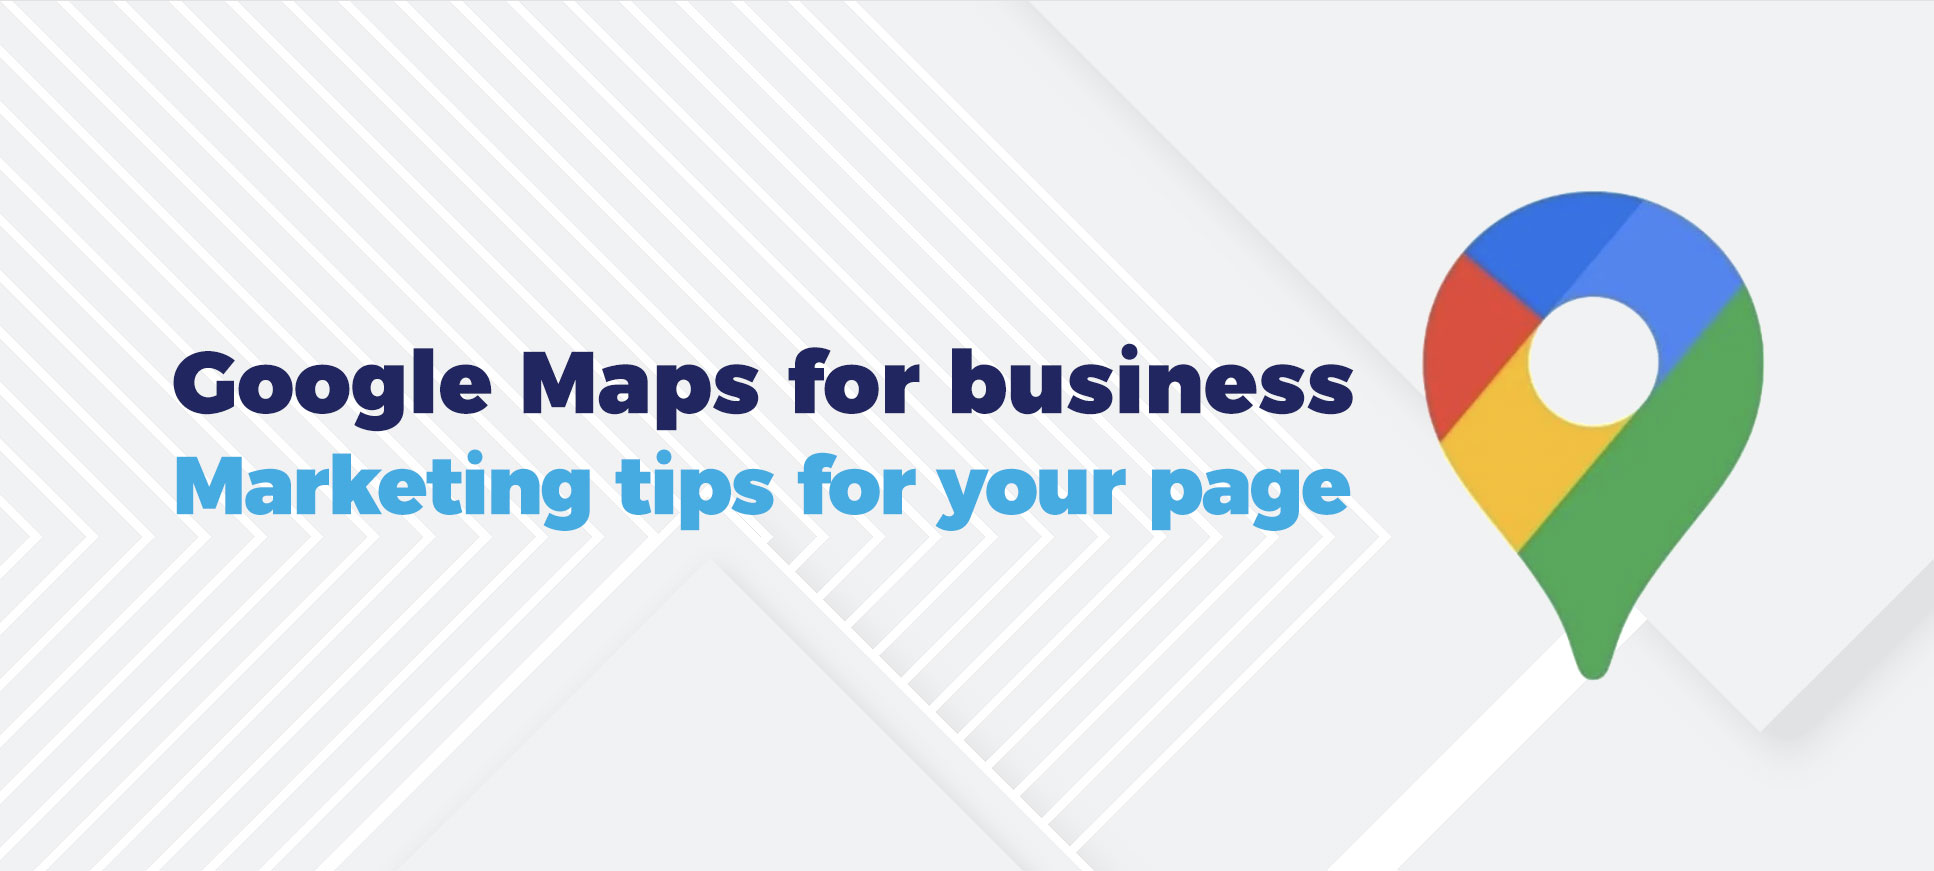 Google maps for business